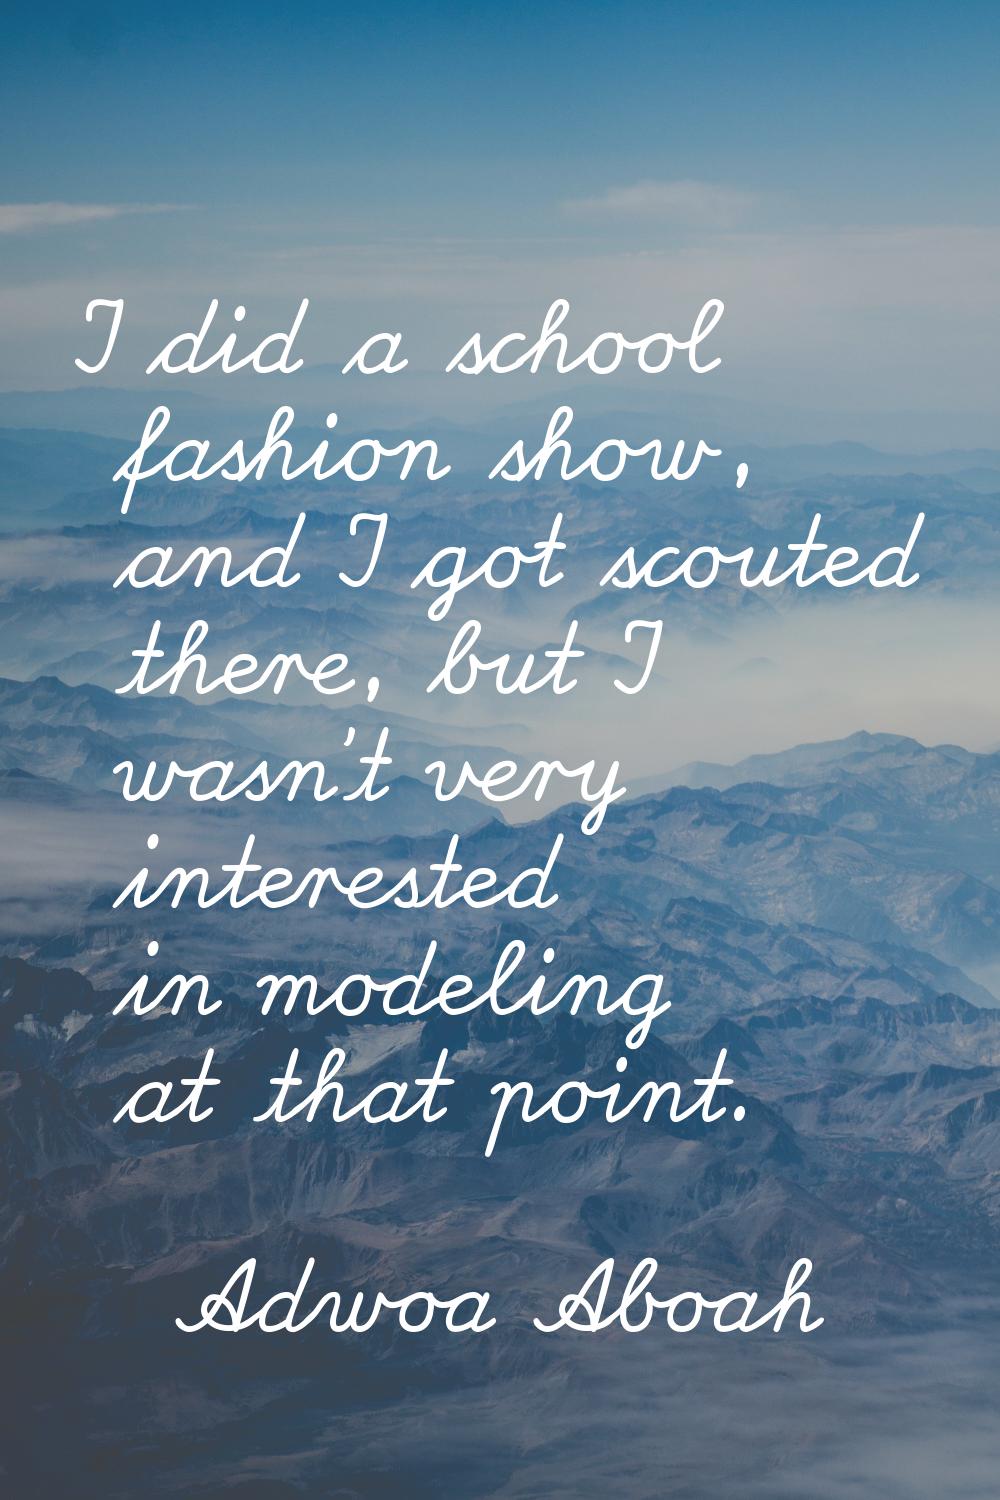 I did a school fashion show, and I got scouted there, but I wasn't very interested in modeling at t